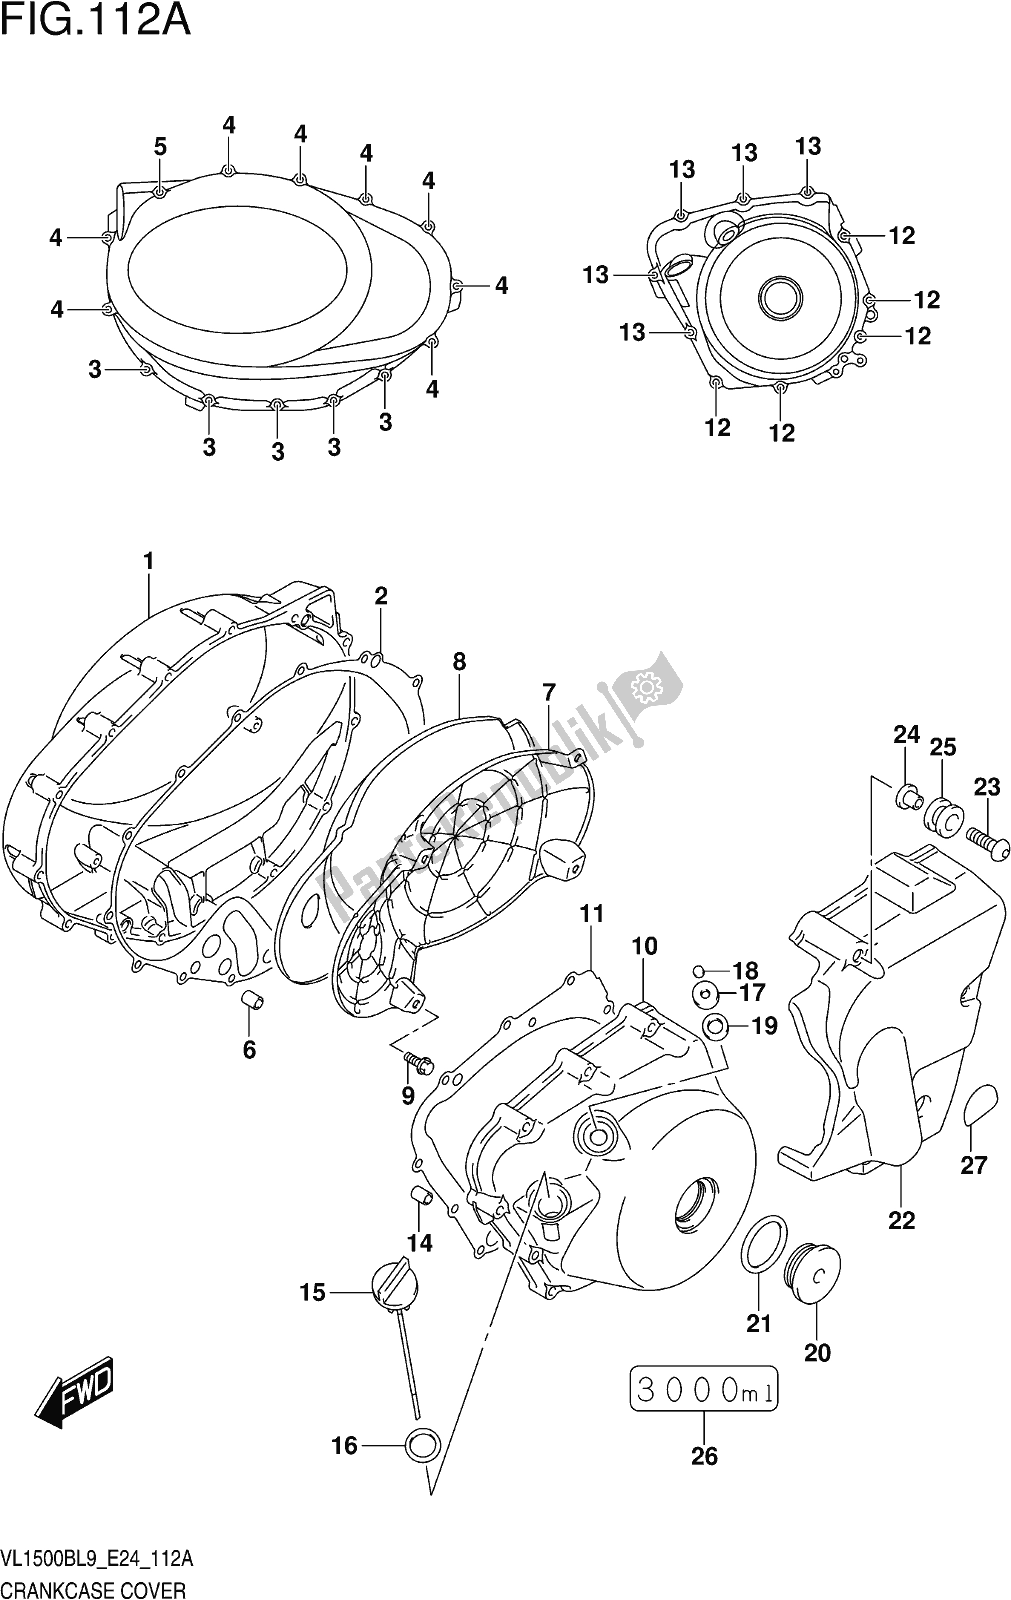 All parts for the Fig. 112a Crankcase Cover of the Suzuki VL 1500B 2019